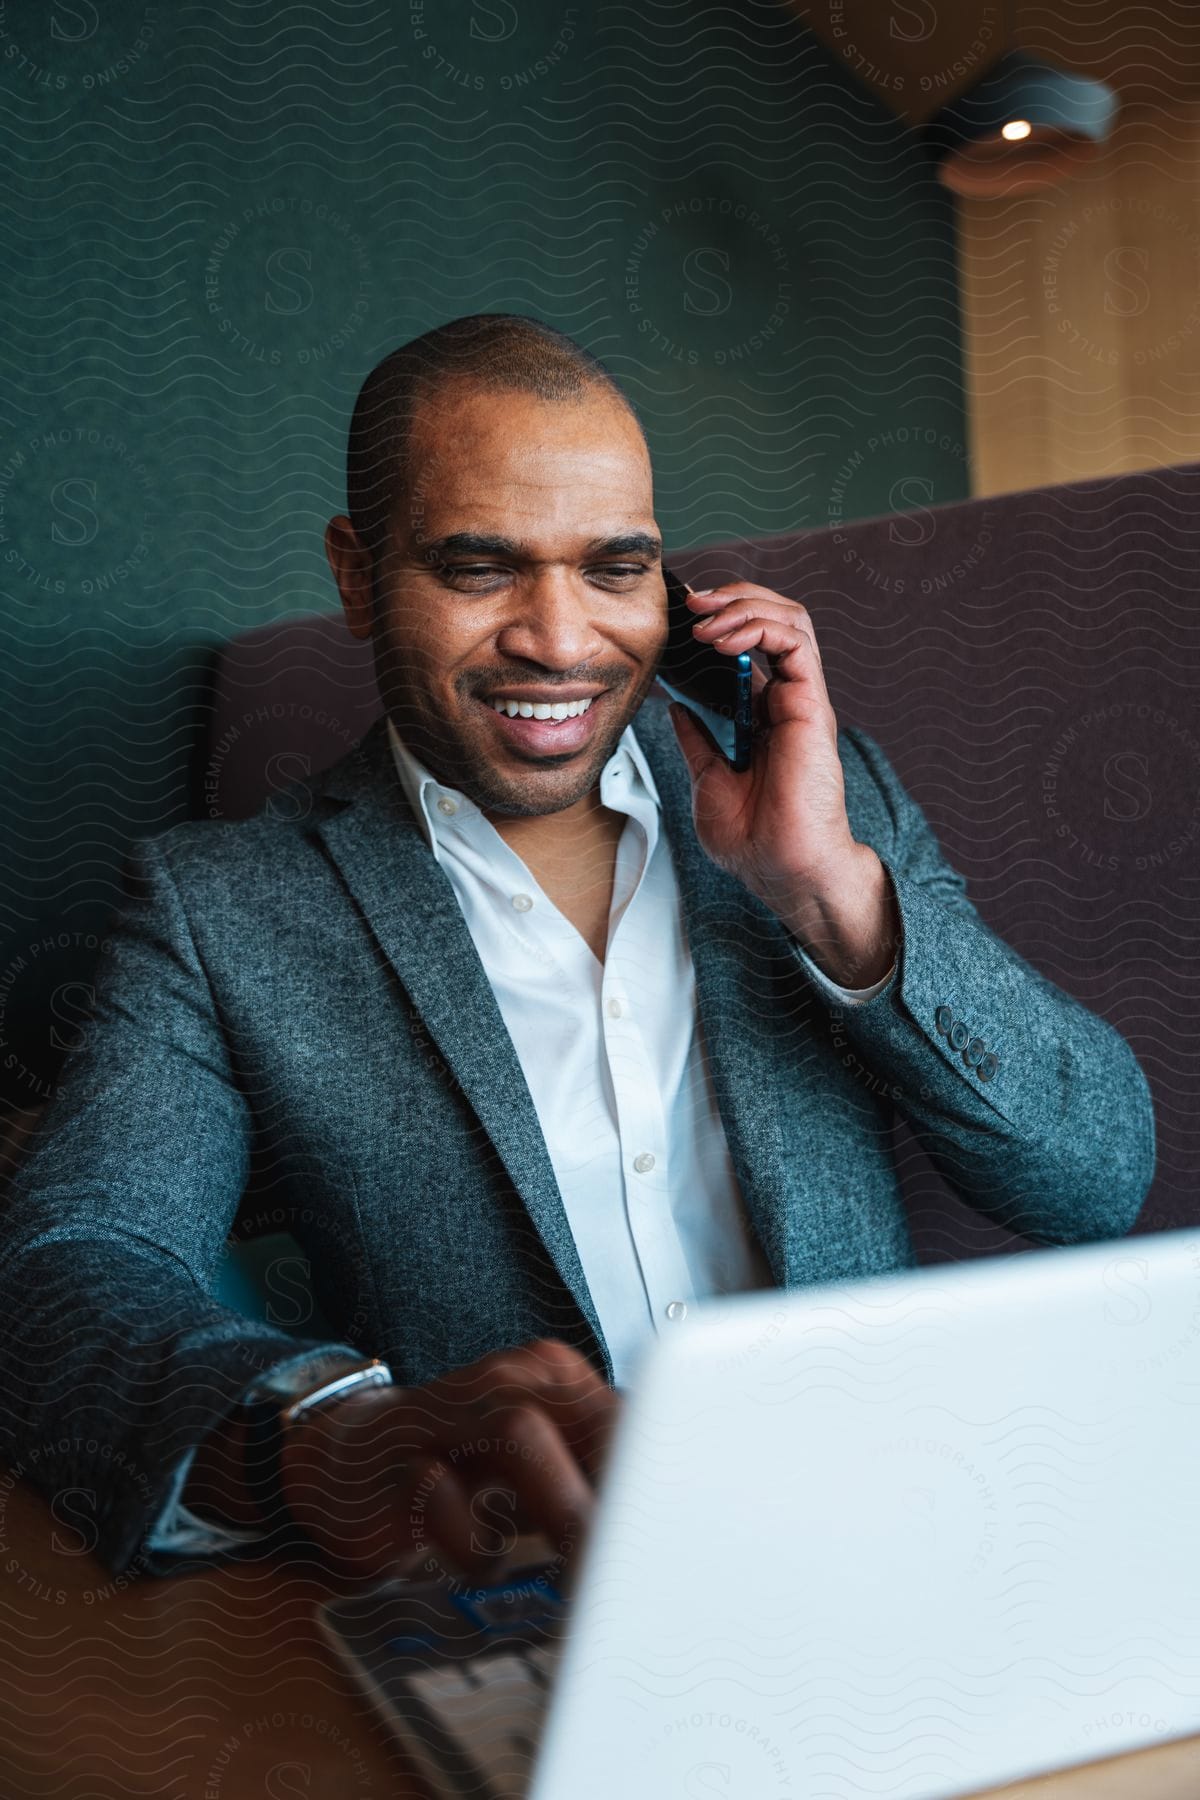 Stock photo of a man wearing a blazer smiles as he is on the phone while using his laptop computer.